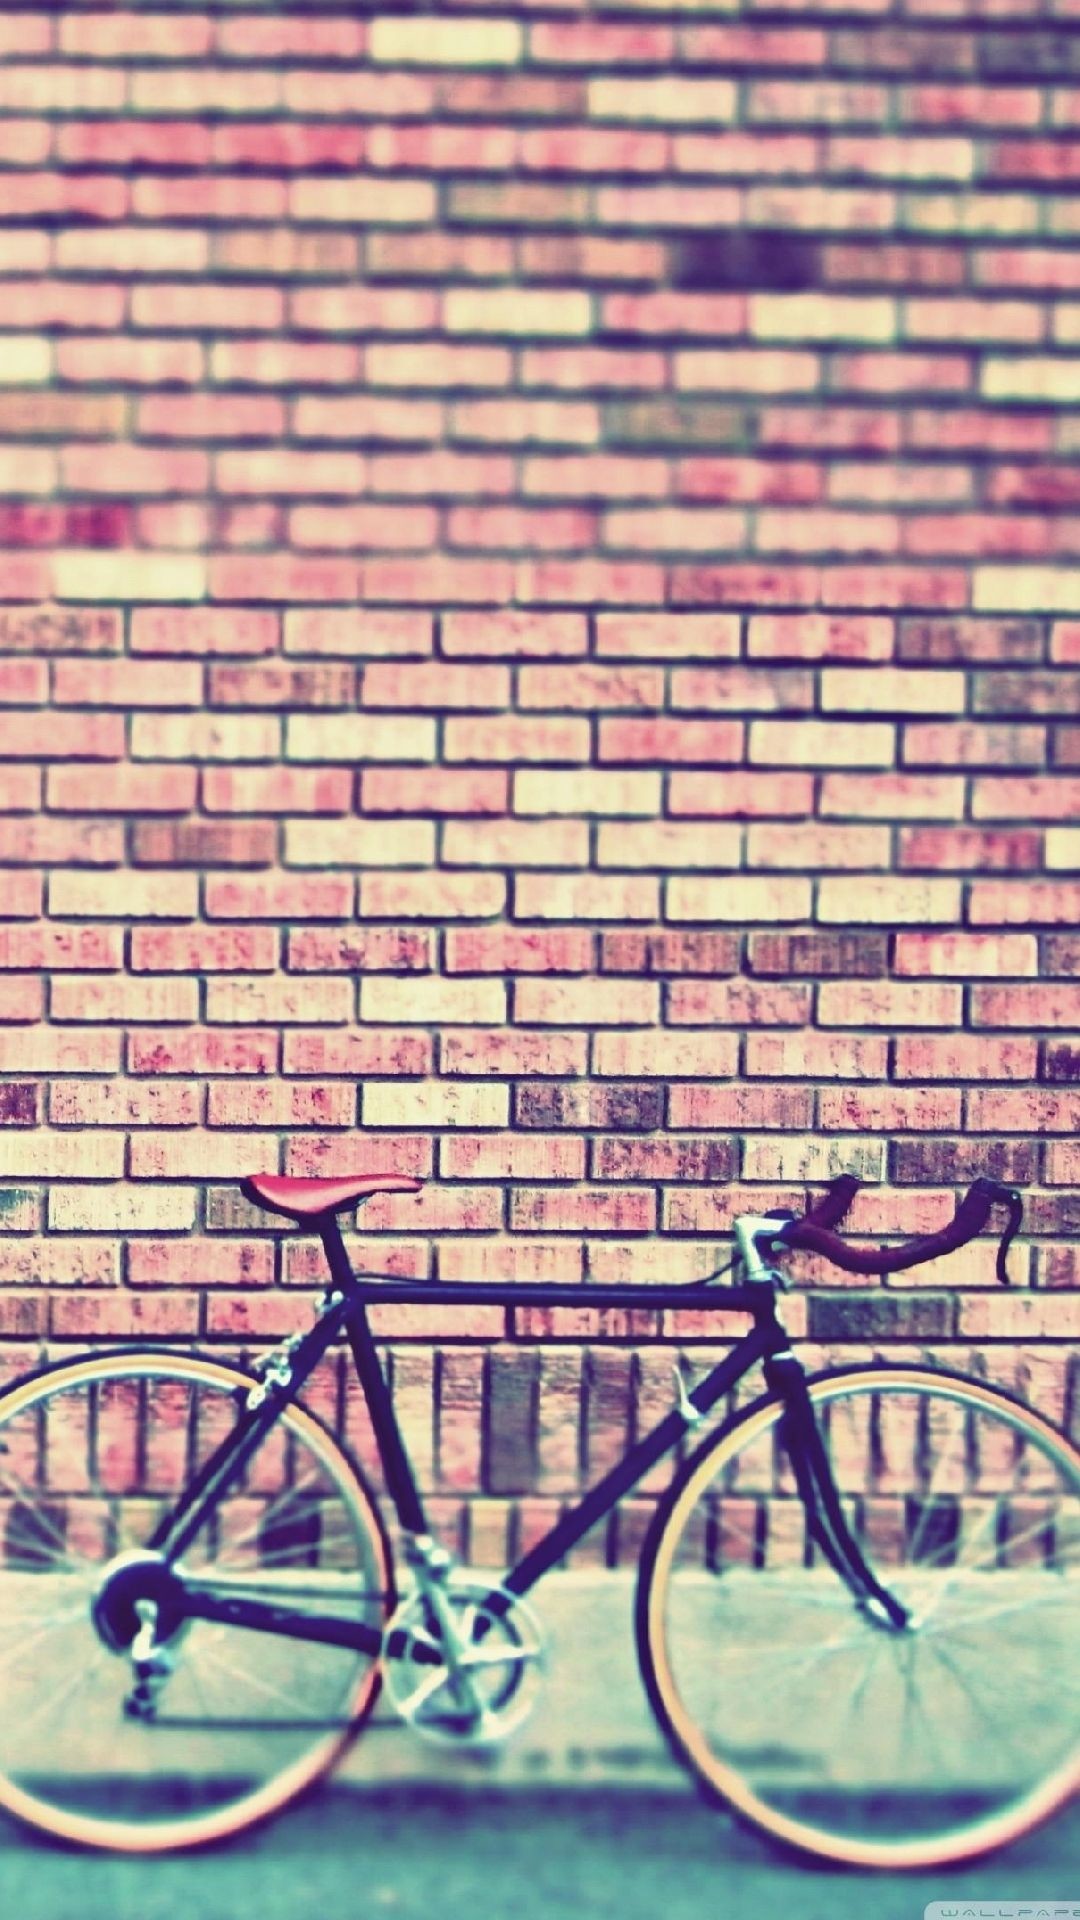 1080x1920 Vintage Bicycle Wallpaper. Bicycle, wall, pink colors, transport, bricks,  iPhone, Android, HD Sazum 2017 background.